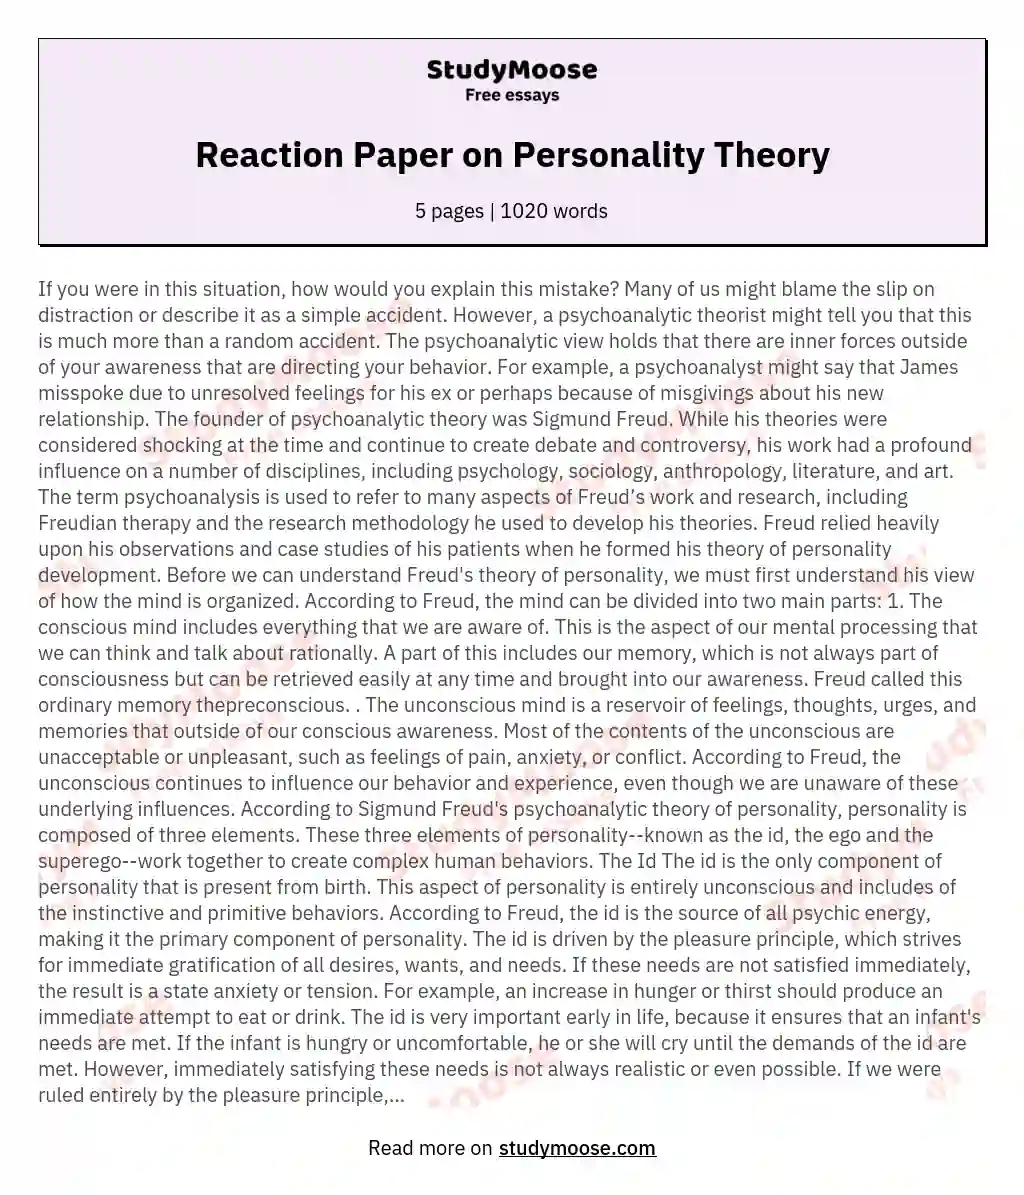 Reaction Paper on Personality Theory essay